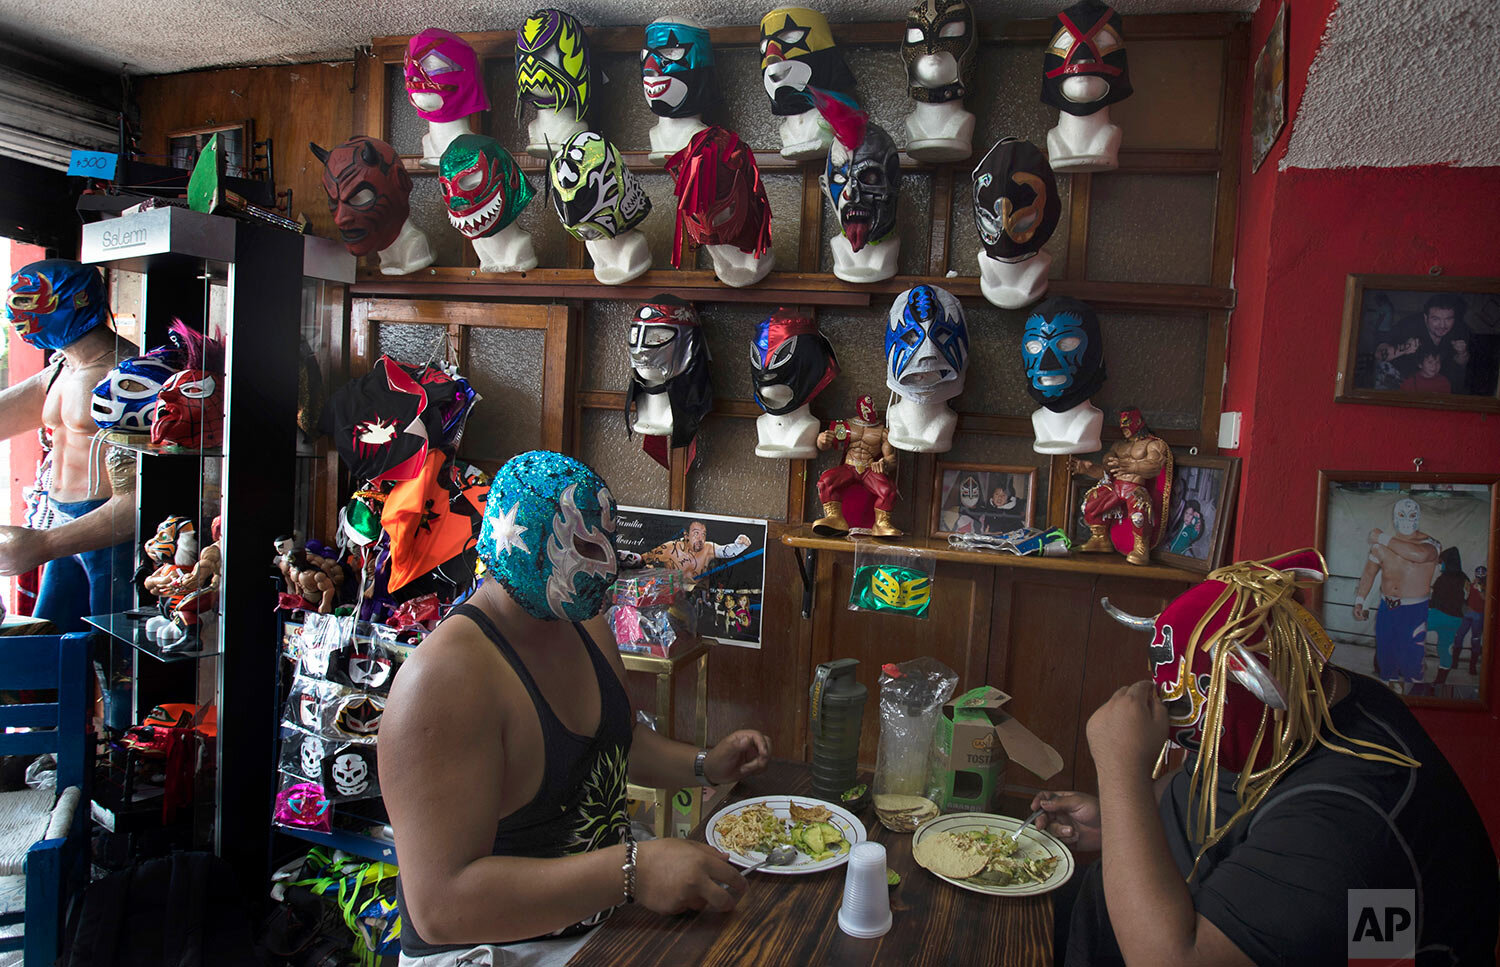  Lucha Libre brothers "Ciclonico," or Cyclone, left, and Mister Jerry, eat at their restaurant that also sells fighter masks in Xochimilco on the outskirts of Mexico City, Wednesday, Aug. 19, 2020. (AP Photo/Marco Ugarte) 